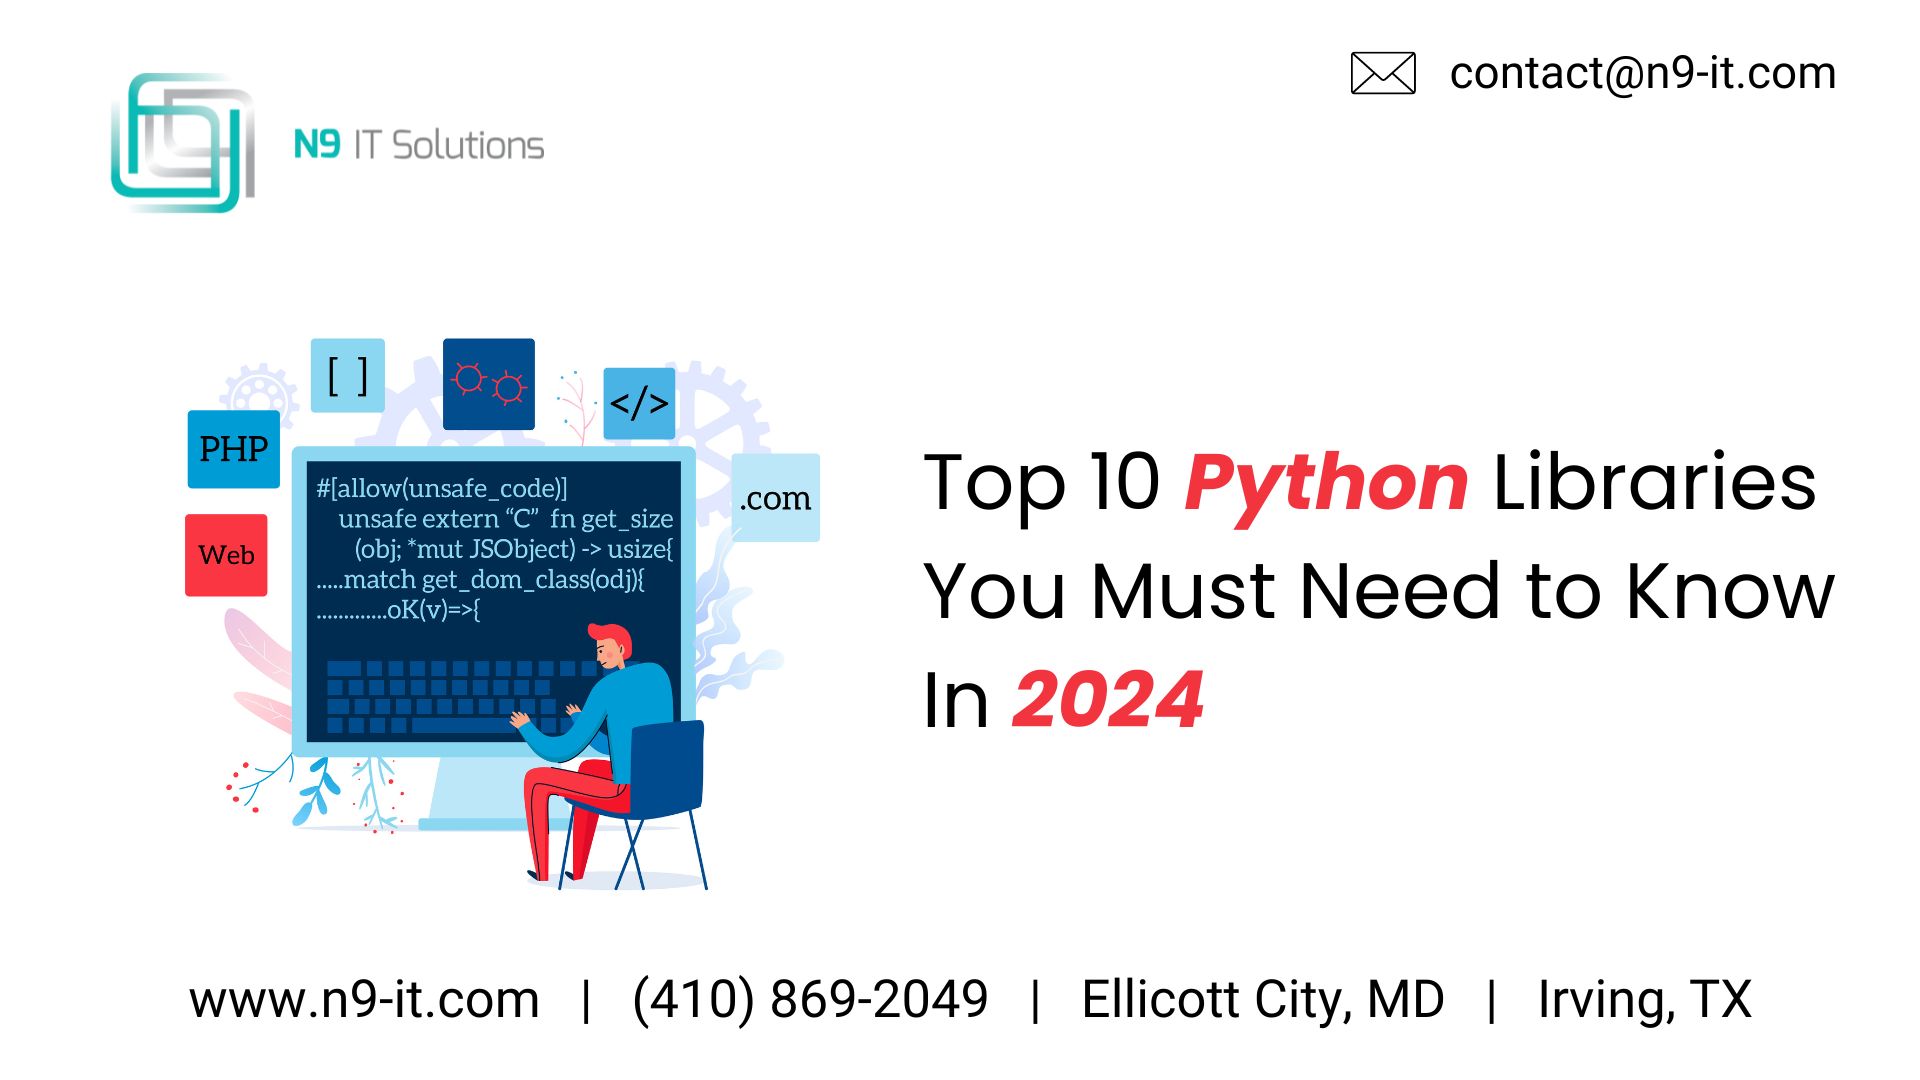 Top 10 Python Libraries You Must Need to Know In 2022